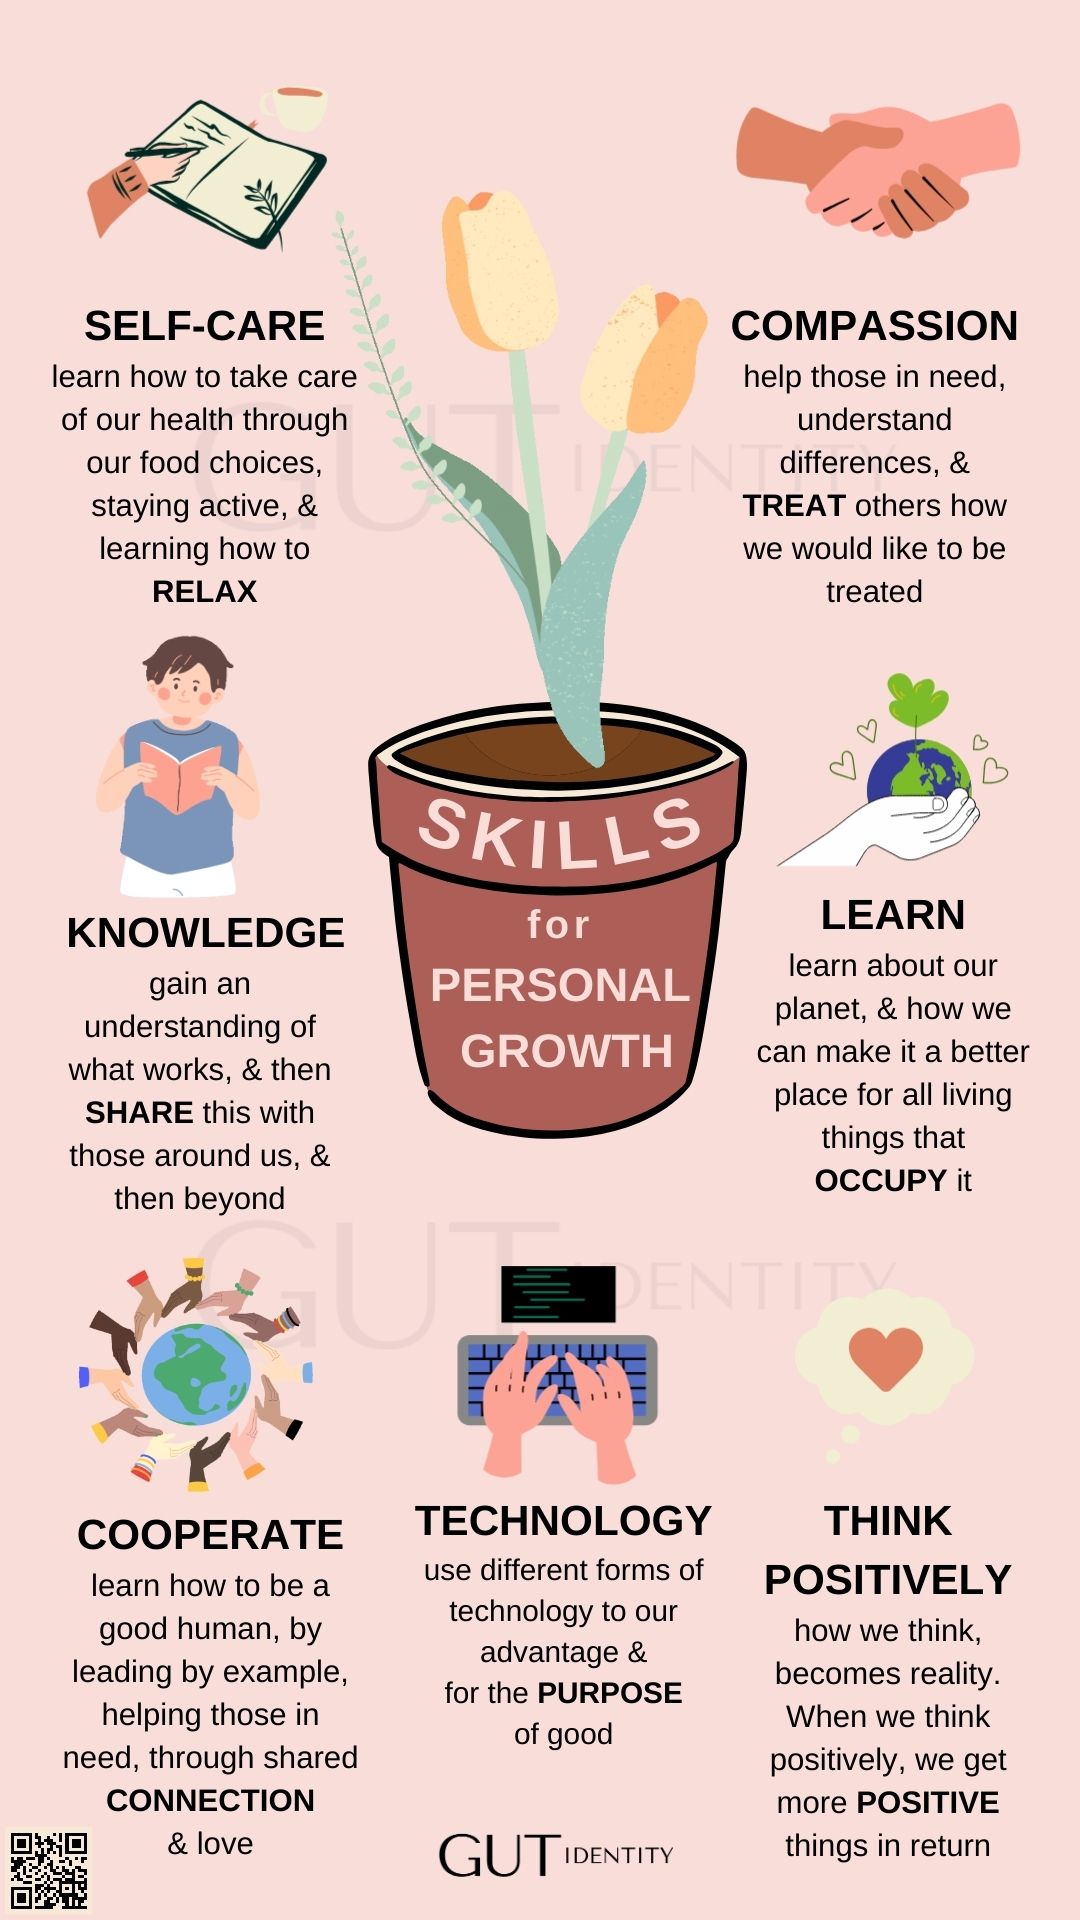 Skills for Personal Growth by Gutidentity